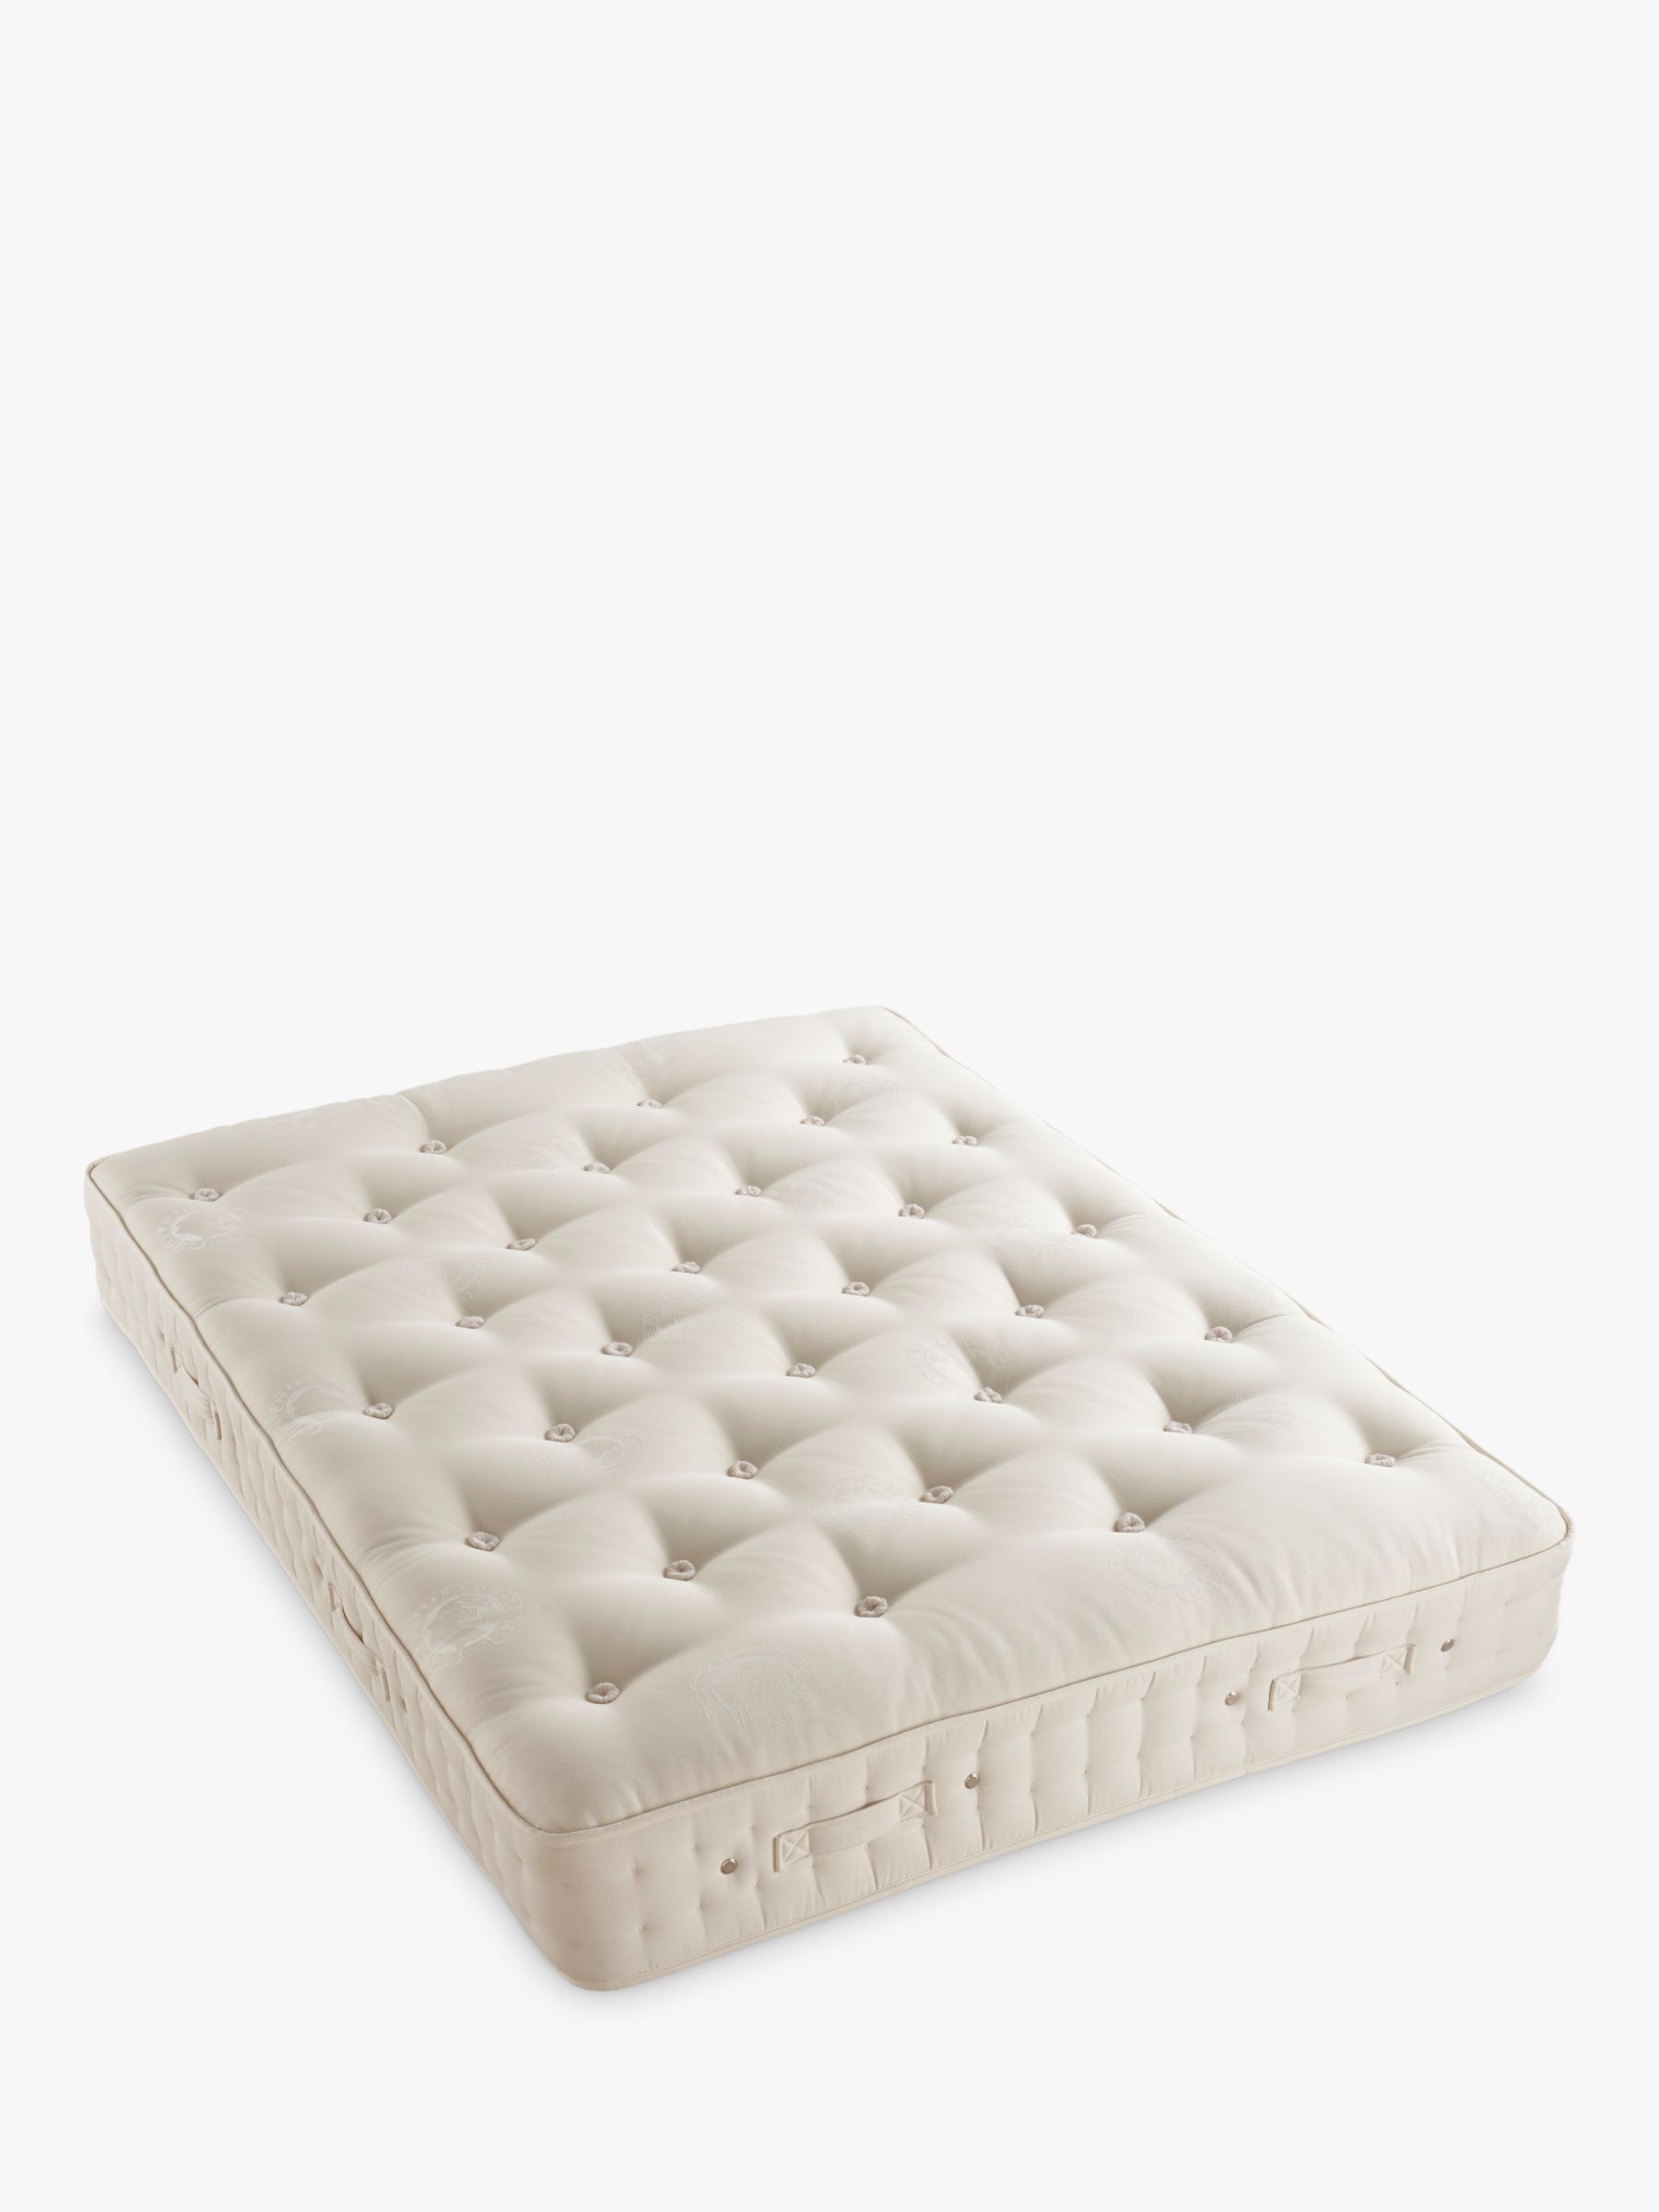 Photo of Hypnos luxury wool no.3 pocket spring mattress firm tension double